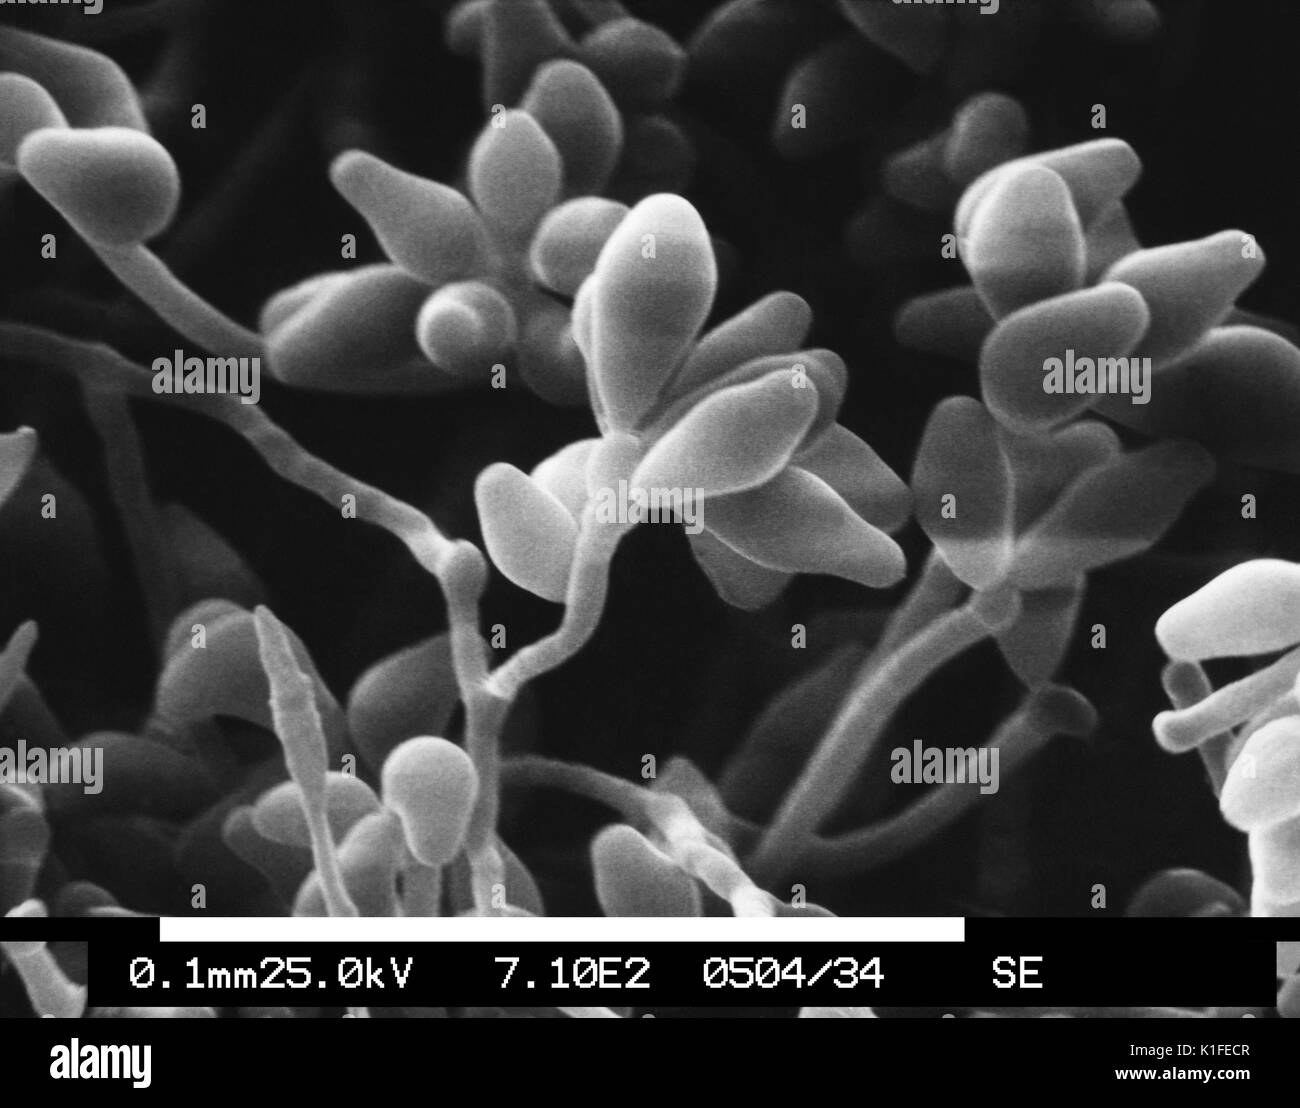 This scanning electron micrograph (SEM) depicts a magnified view of a colony of the dematiaceous filamentous fungus Curvularia geniculata, revealing the morphologic details of the organism?s hyphae, and conidiophores topped with spore-containing conidia. Though normally found living in soil or decaying vegetation, Curvularia geniculata is pathogenic to humans, causing wound infections known as phaeohyphomycosis, which are fungal infections that can involve a number of bodily structures including the skin, respiratory tract, and brain, to name a few. Image courtesy CDC/Robert Simmons, Janice Ha Stock Photo